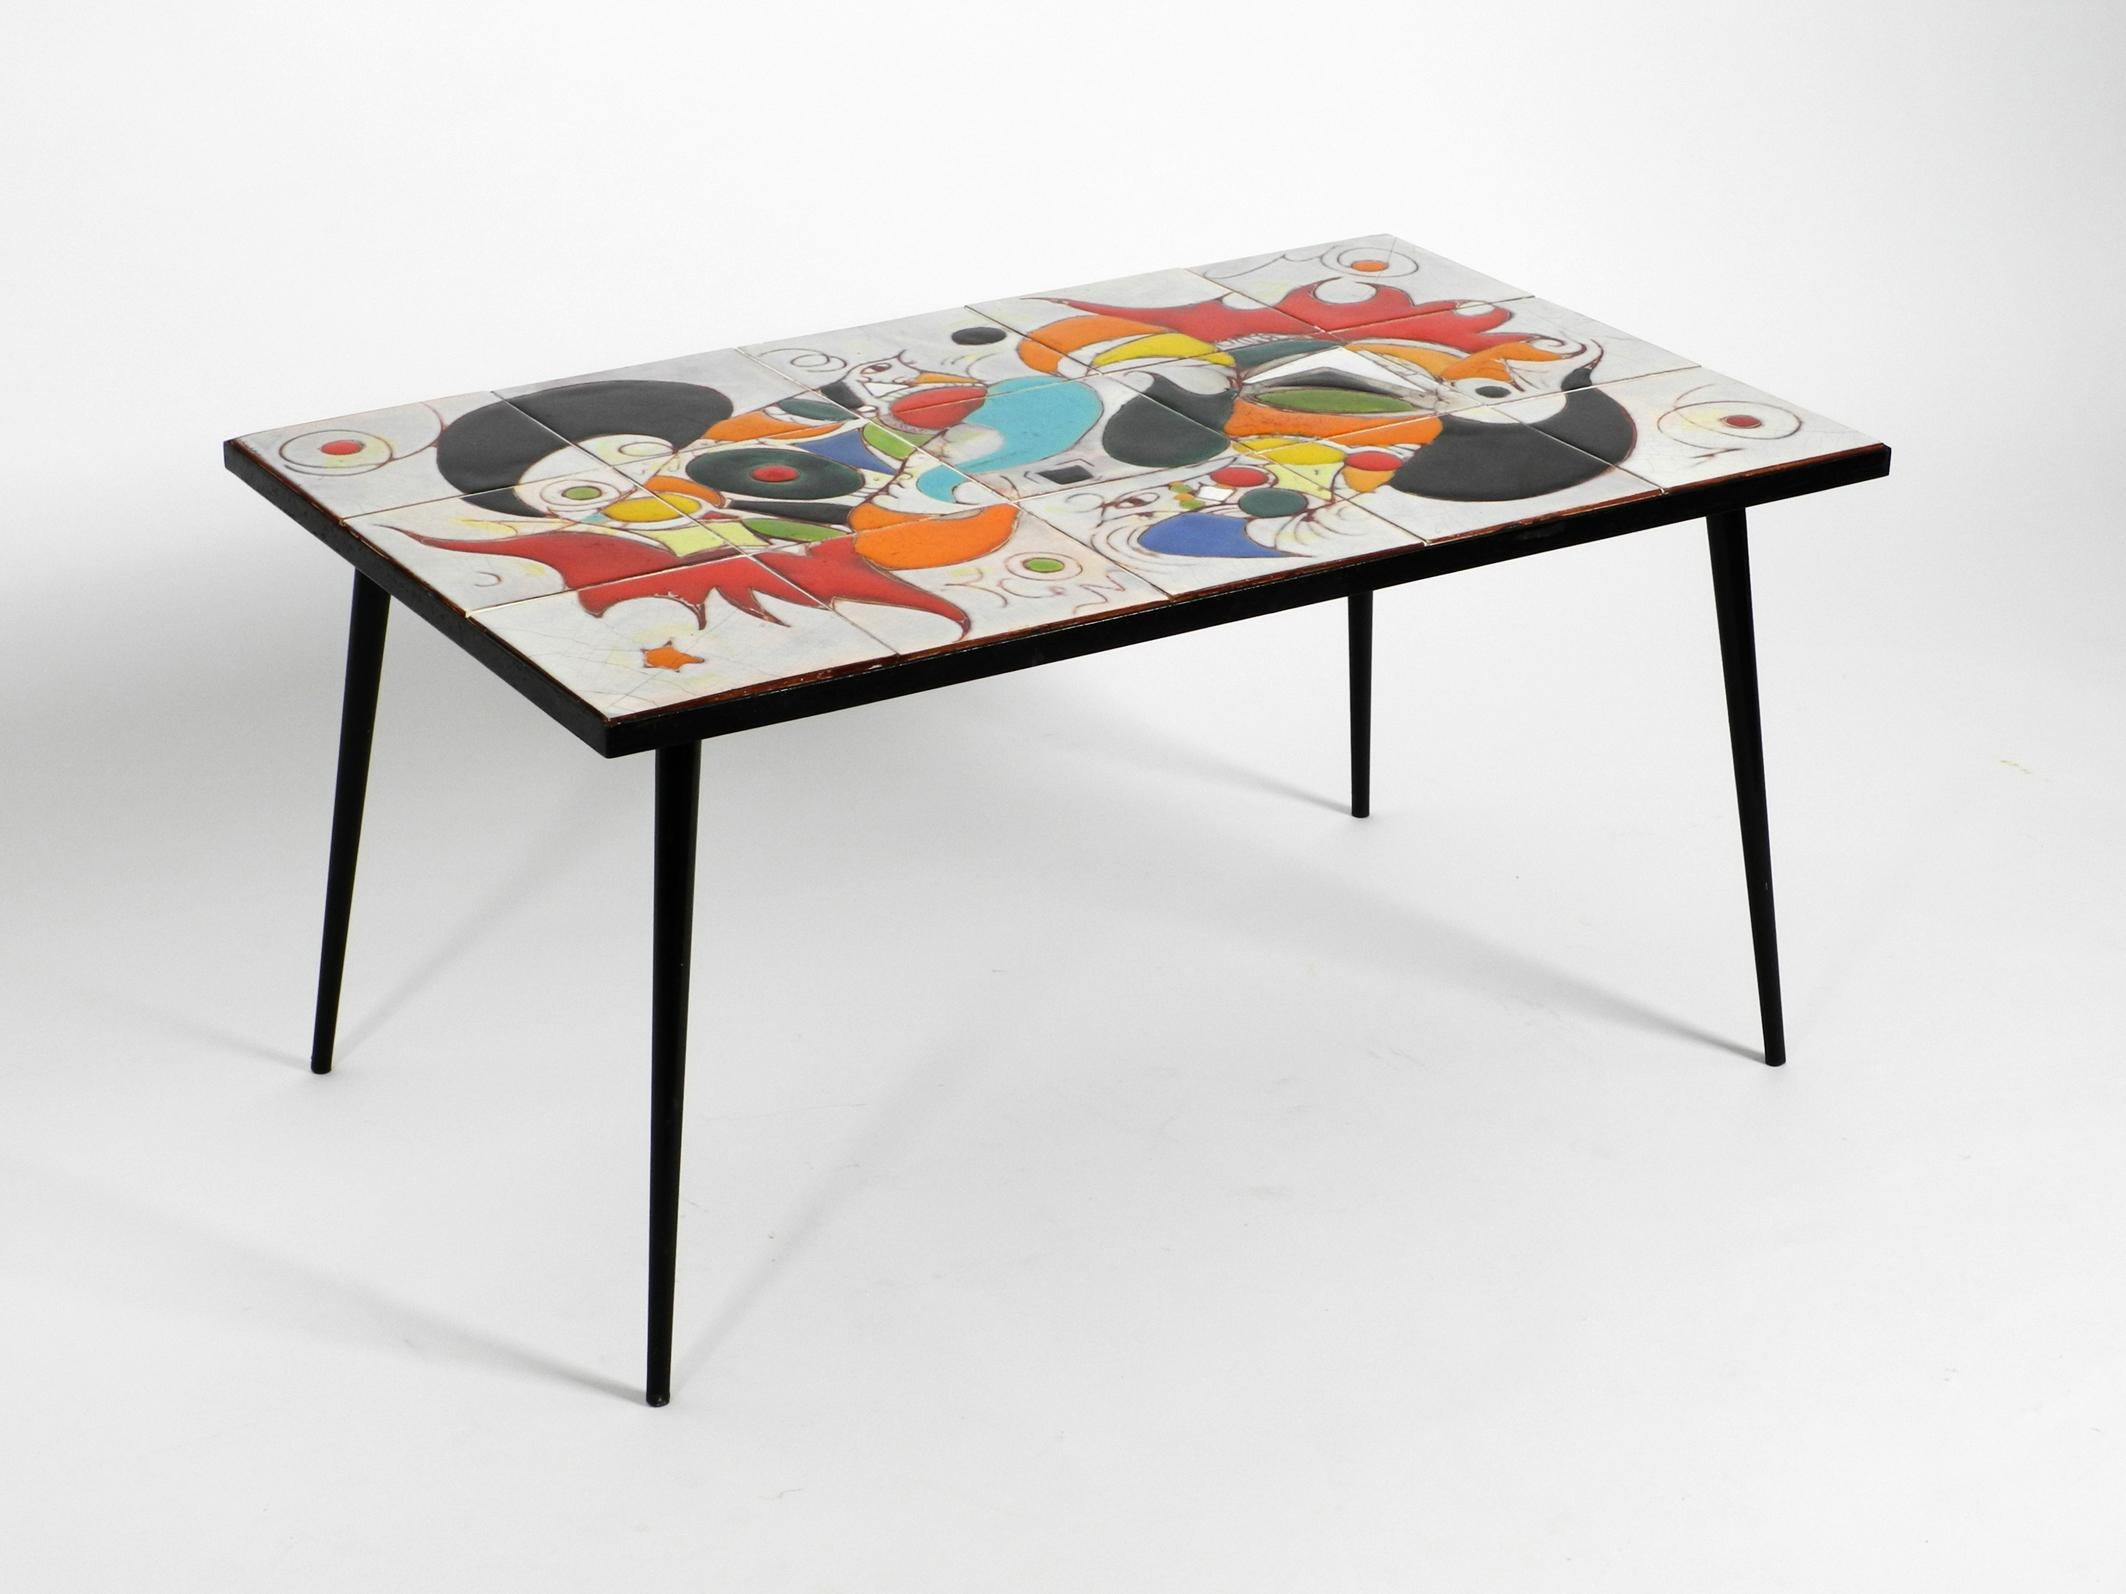 Midcentury Italian Modern Iron Table with Tiled Top and Abstract Motif In Good Condition For Sale In München, DE